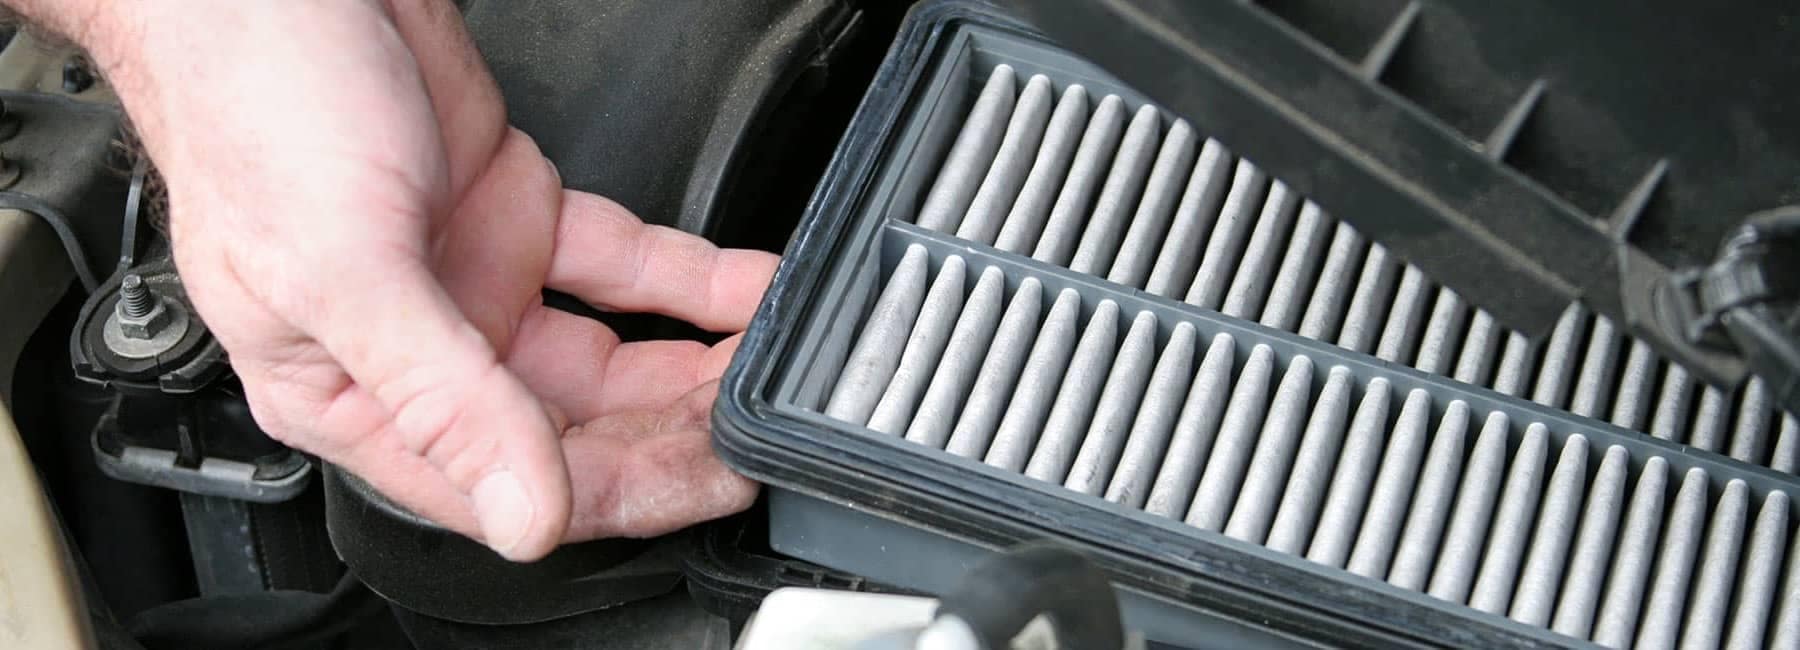 Hand Removing an Engine Air Filter